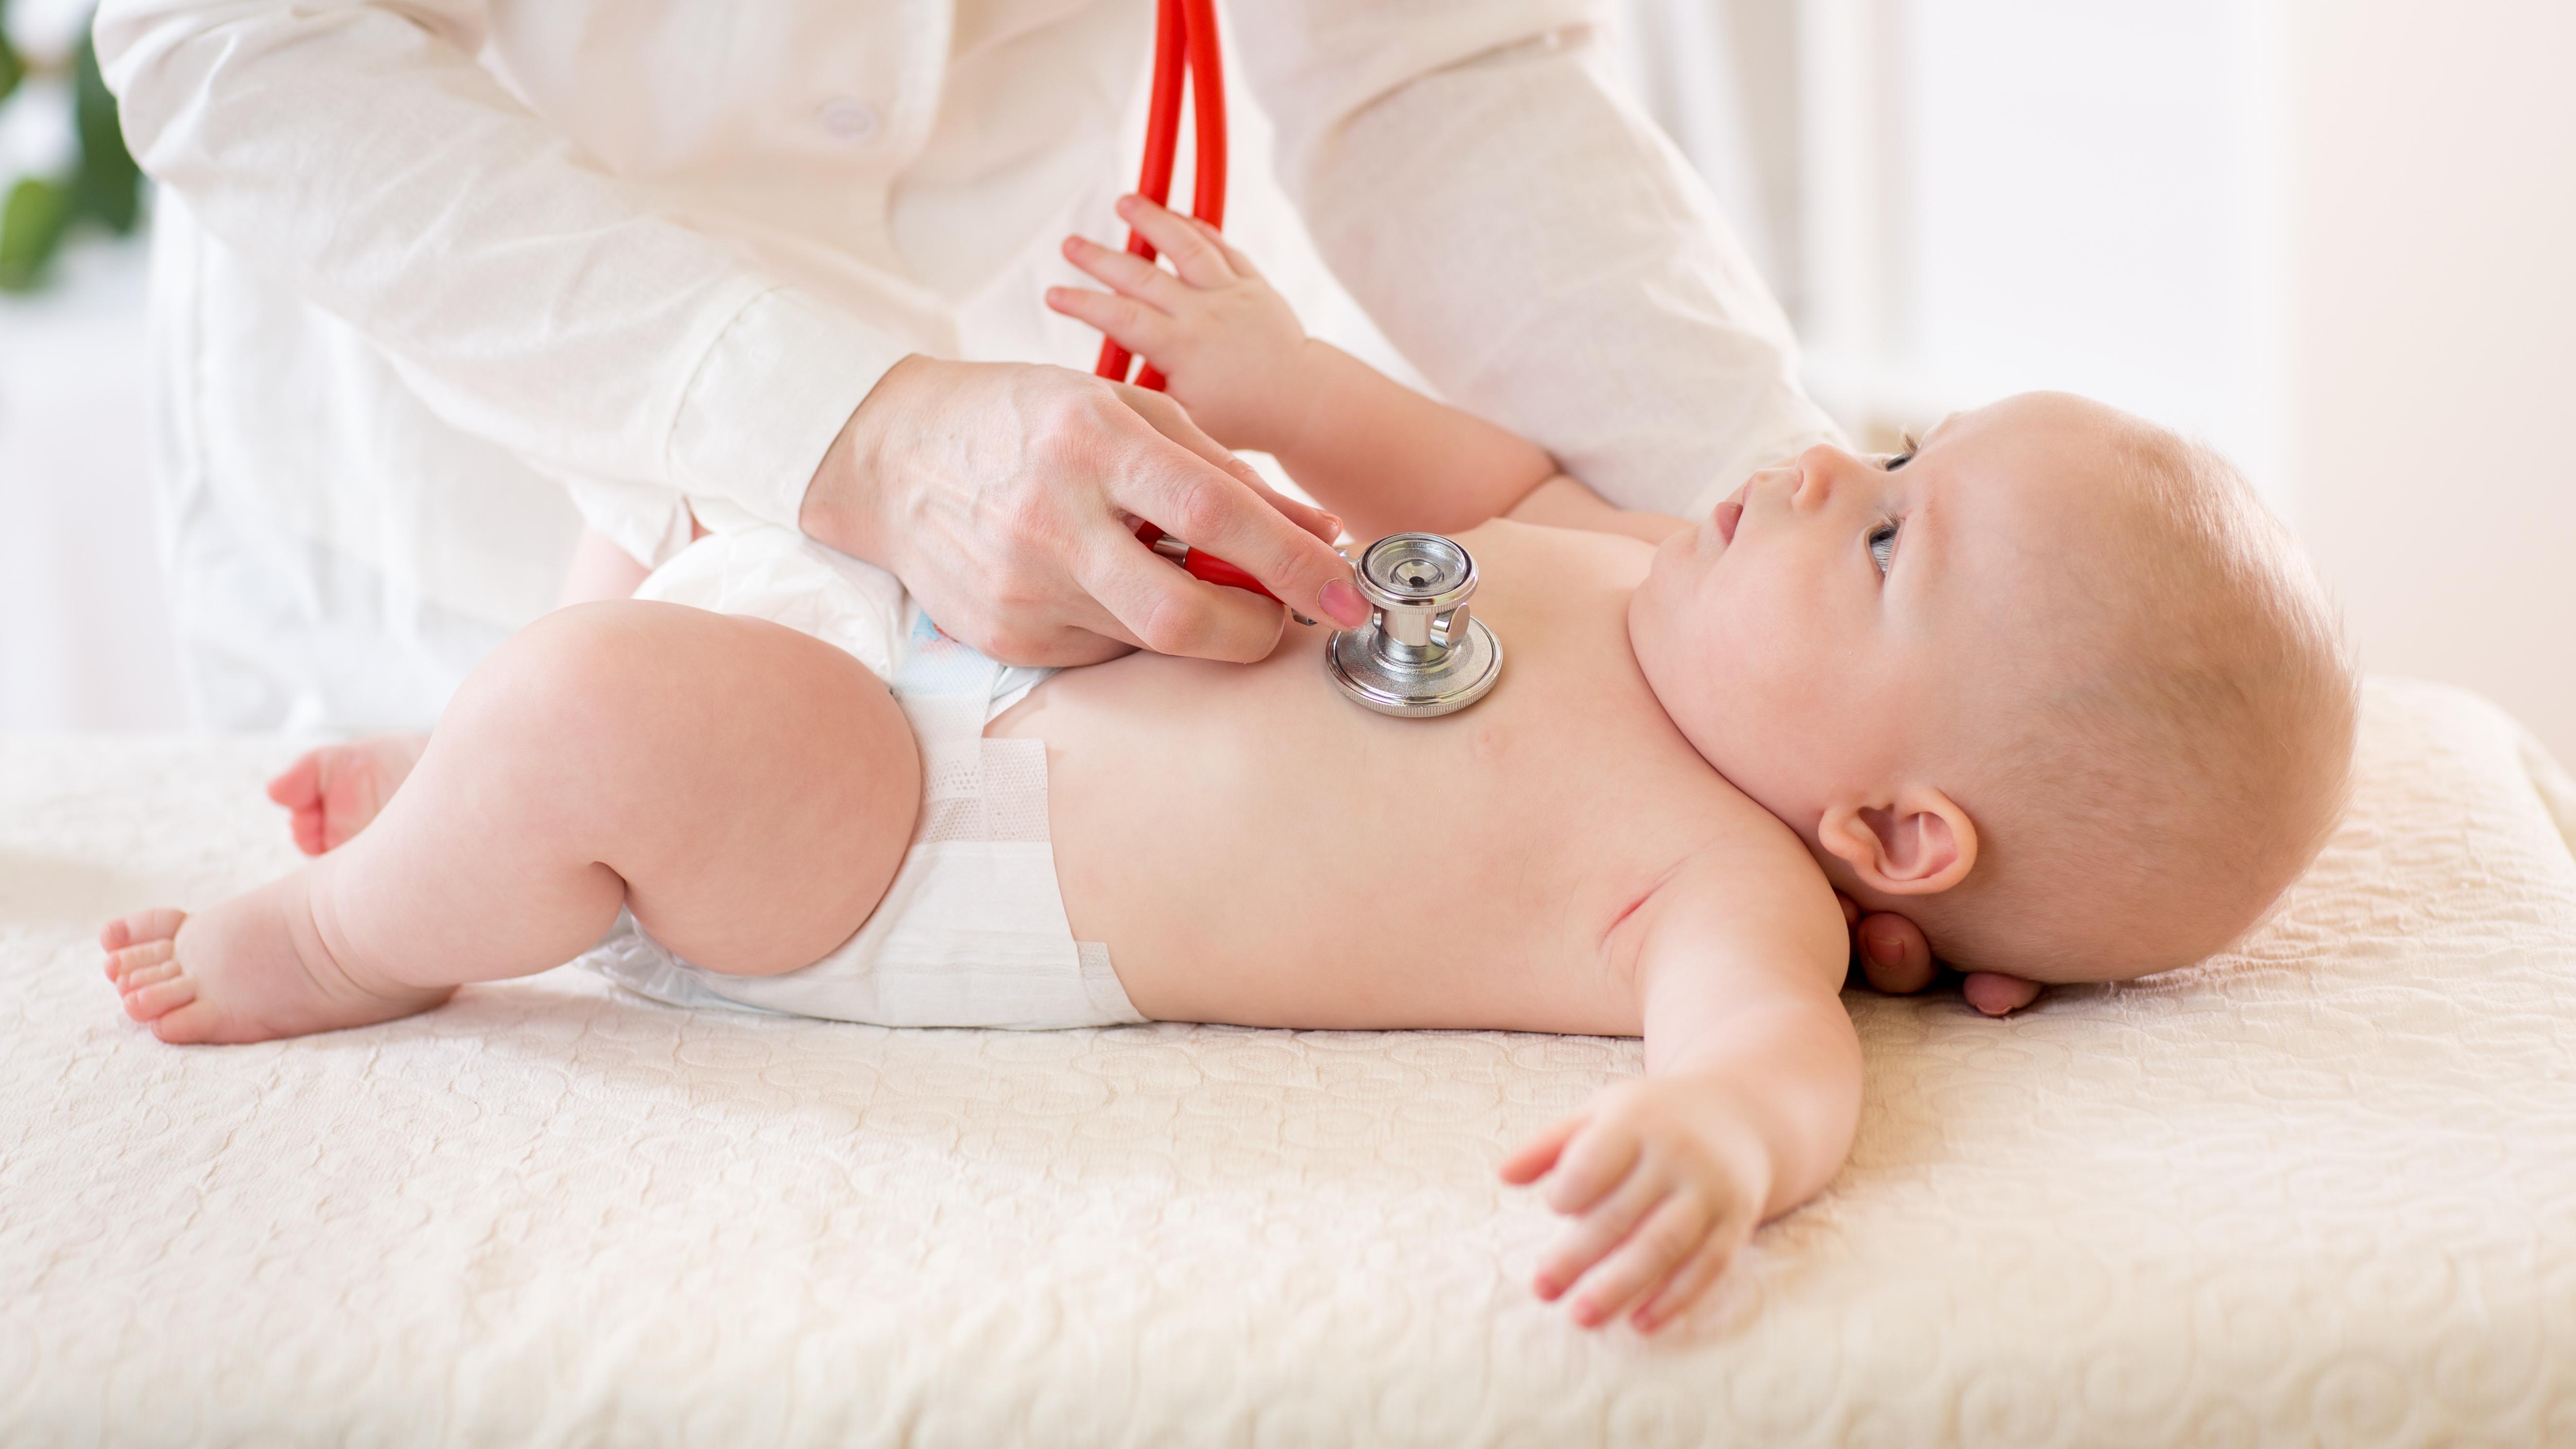 baby being examined by a doctor with stethoscope 